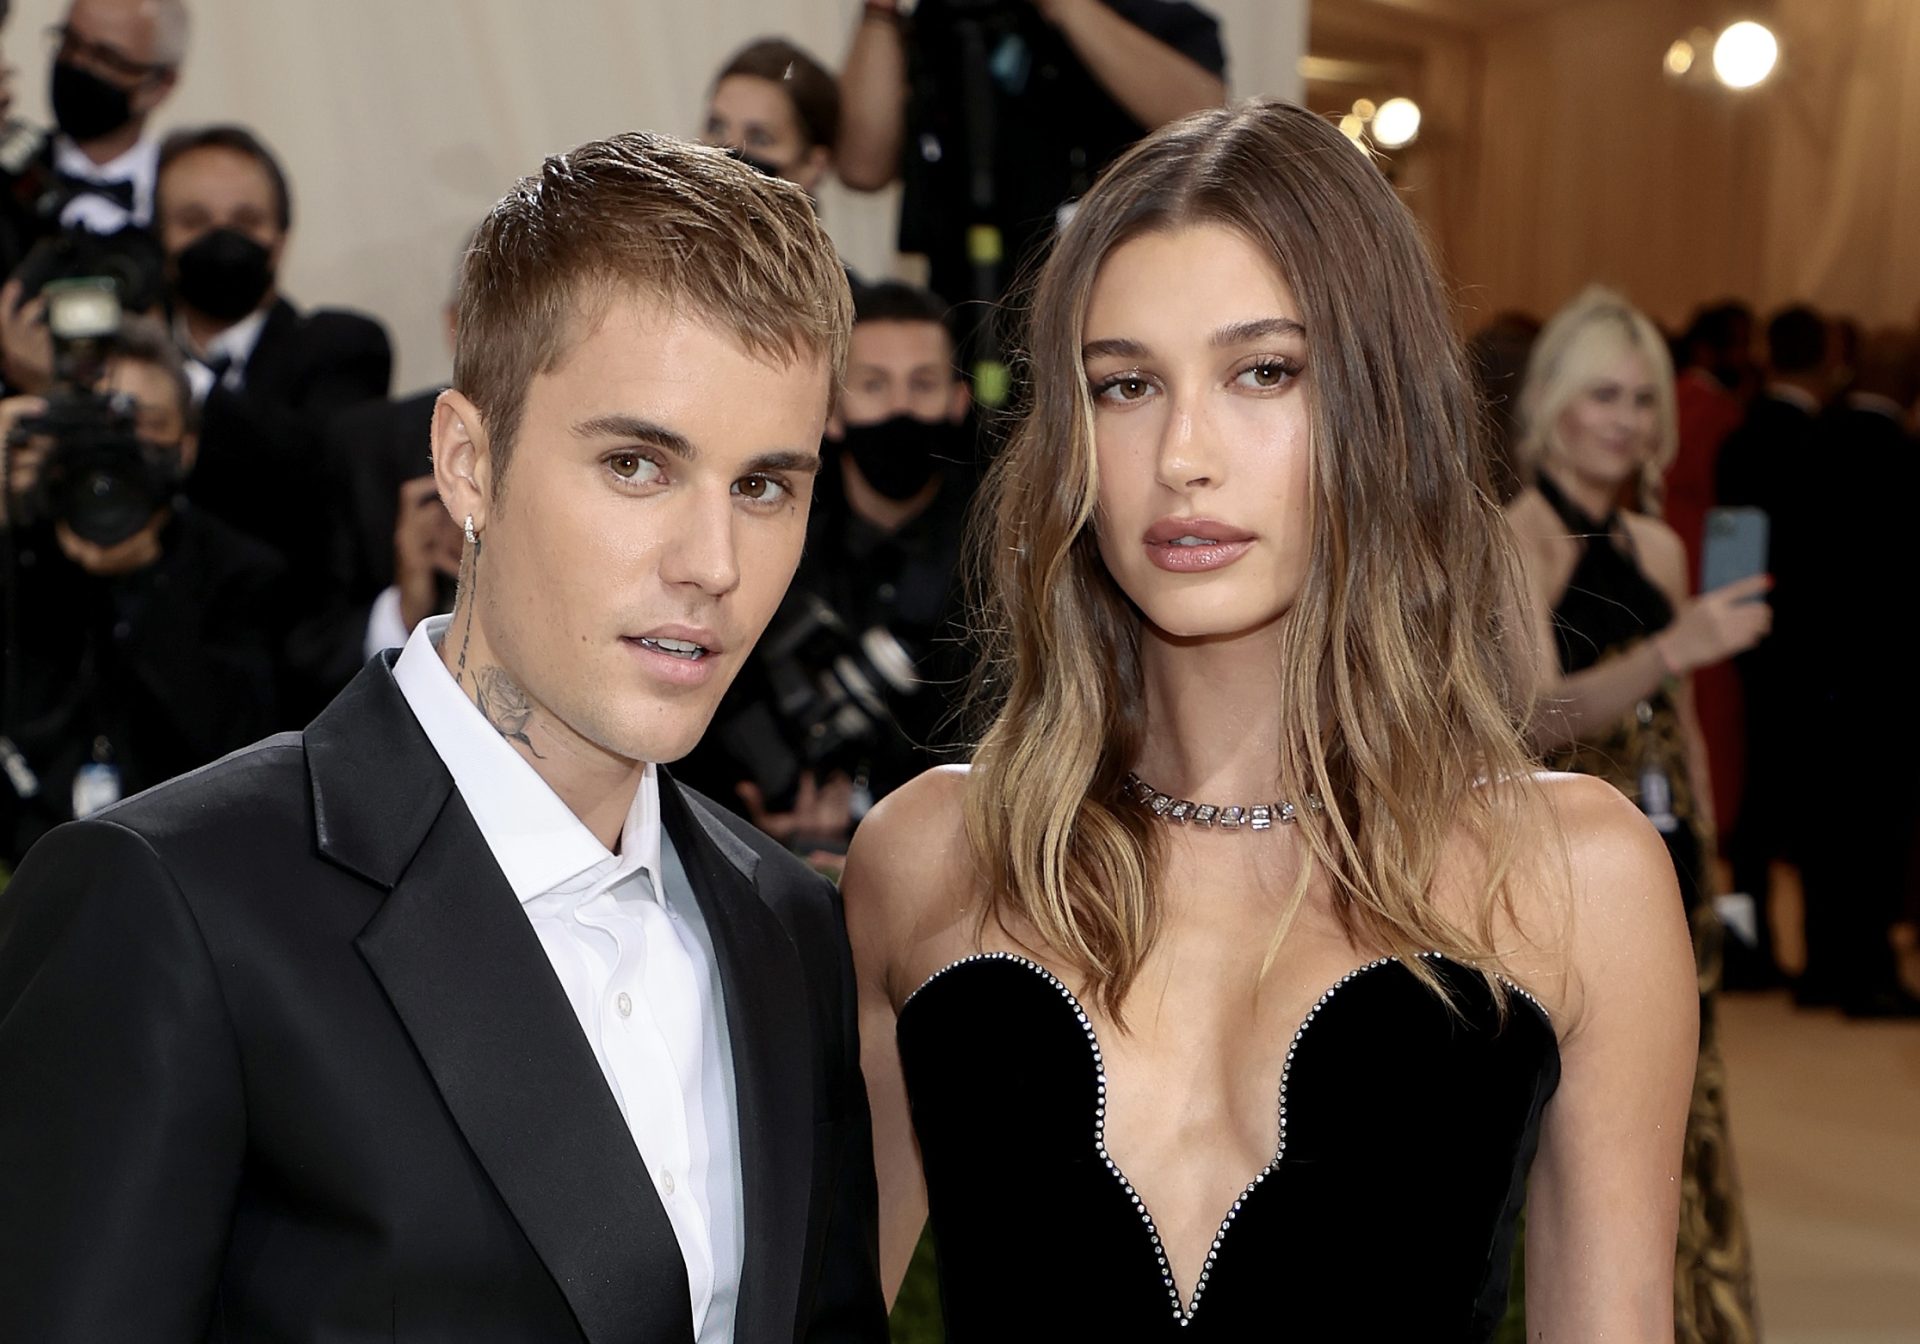 Hailey Bieber Says Her & Justin Bieber's Recent Health Issues Have Brought Them 